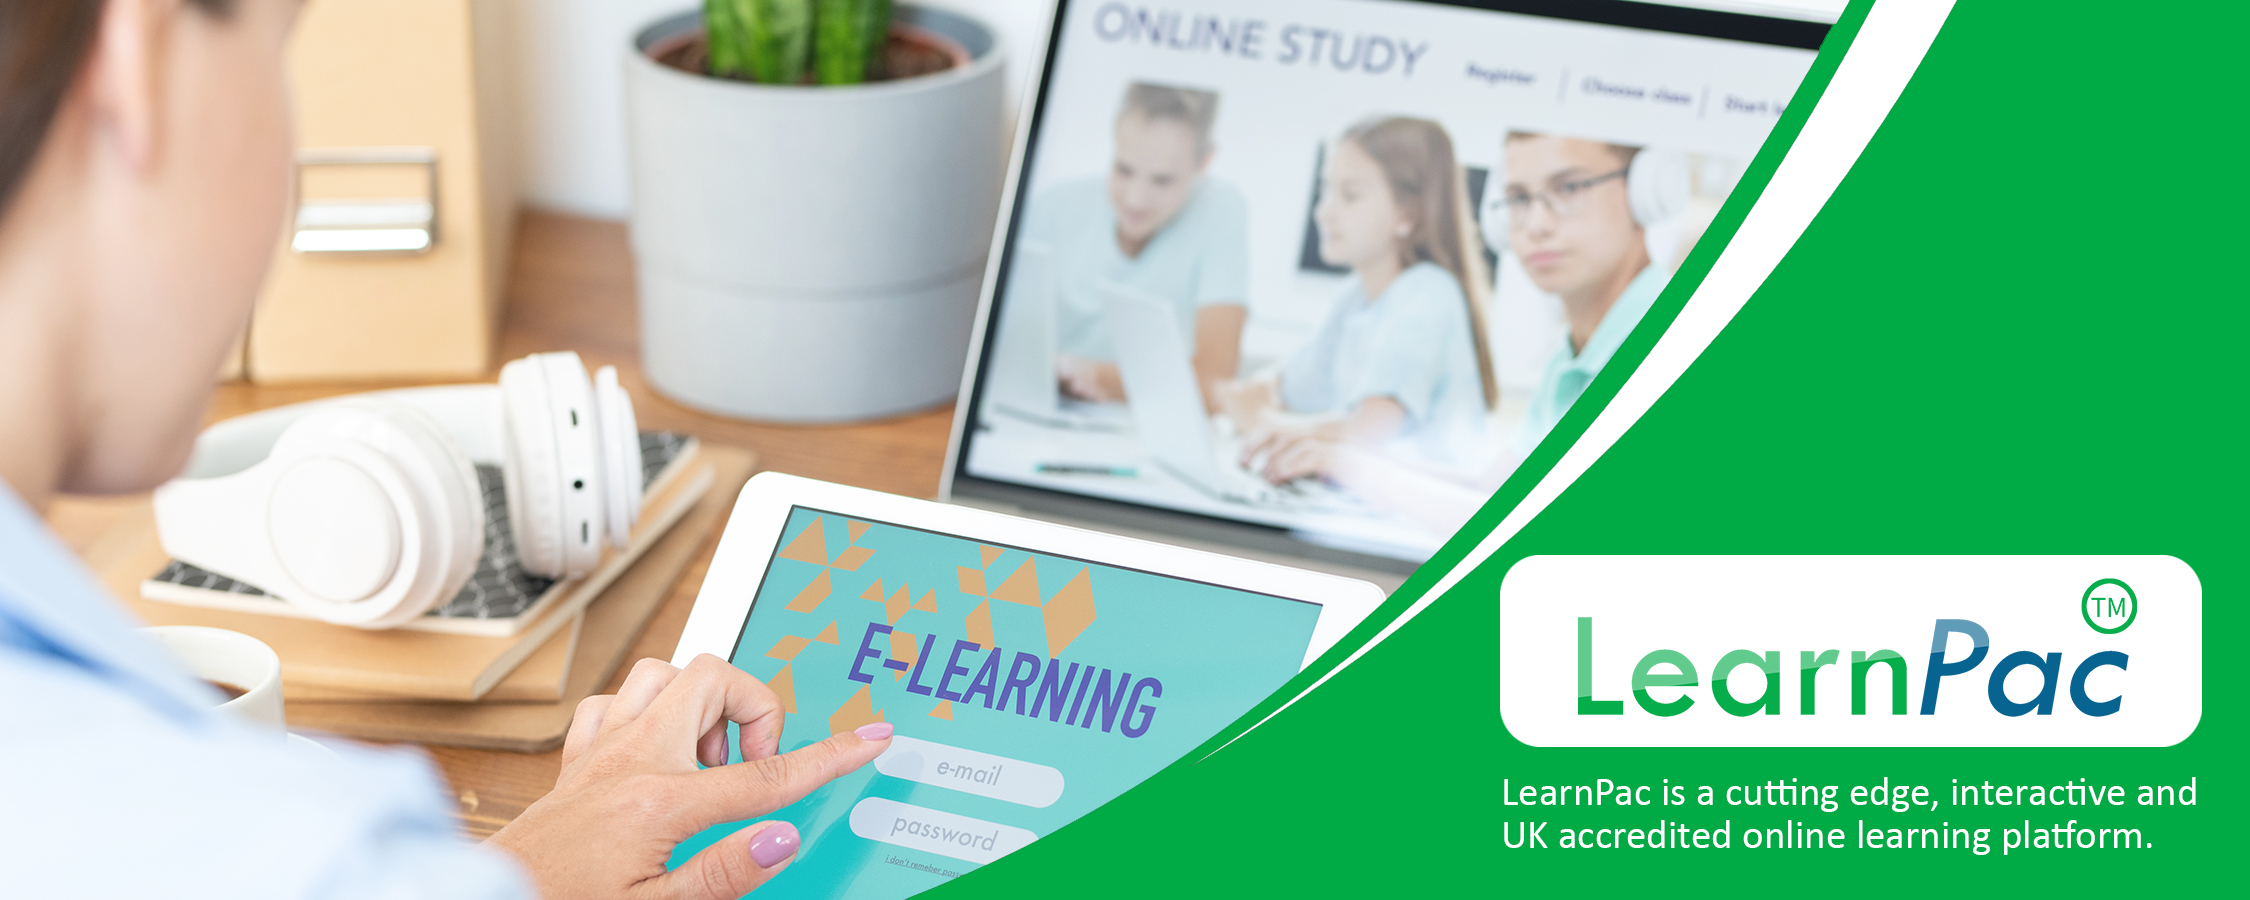 Annual Leave Procedures and Policy - Online Learning Courses - E-Learning Courses - LearnPac Systems UK -